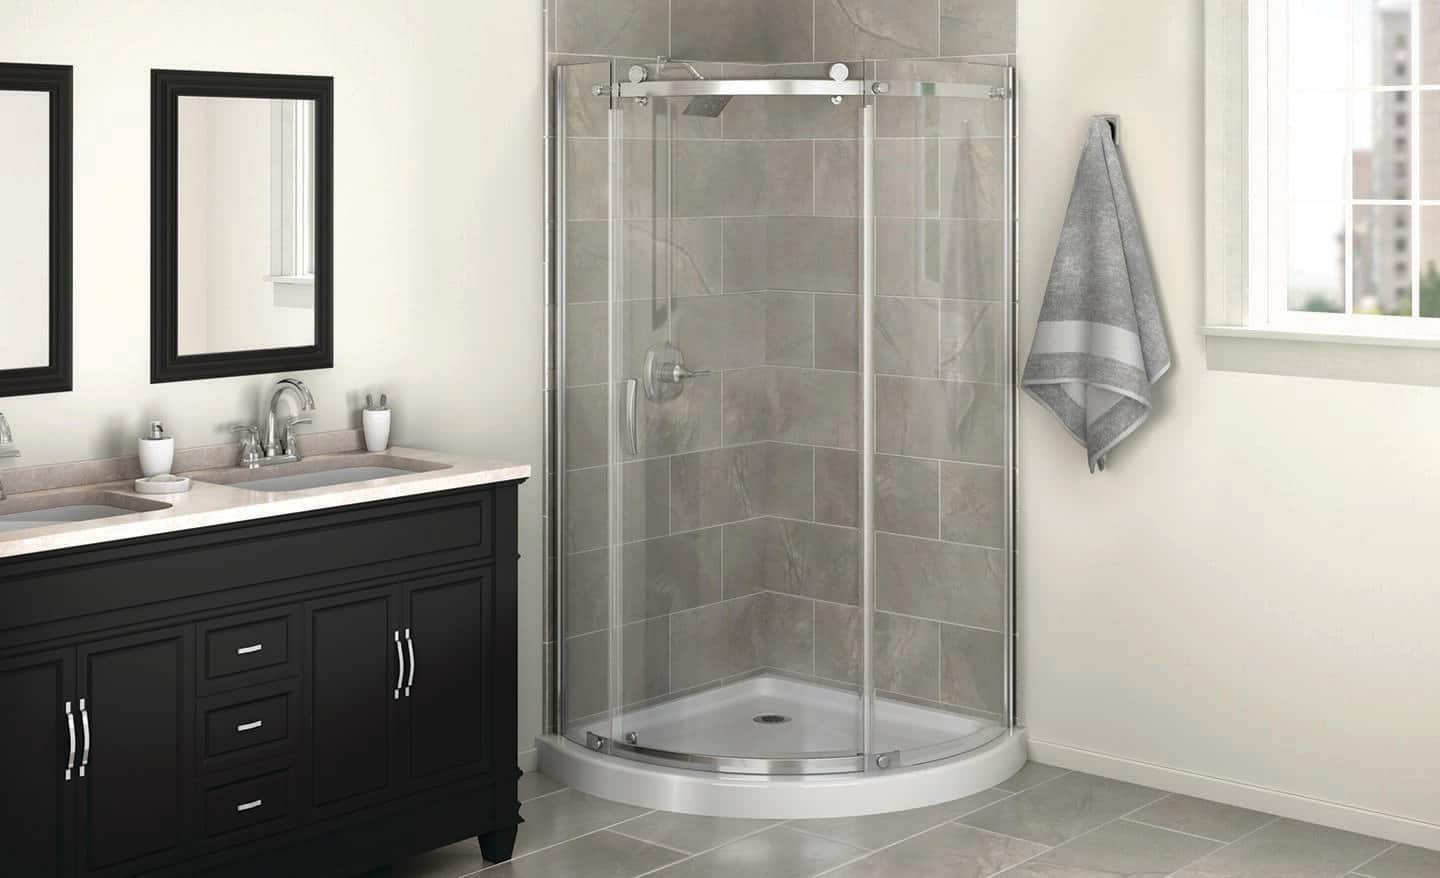 A bathroom with a corner shower that has round shower doors.